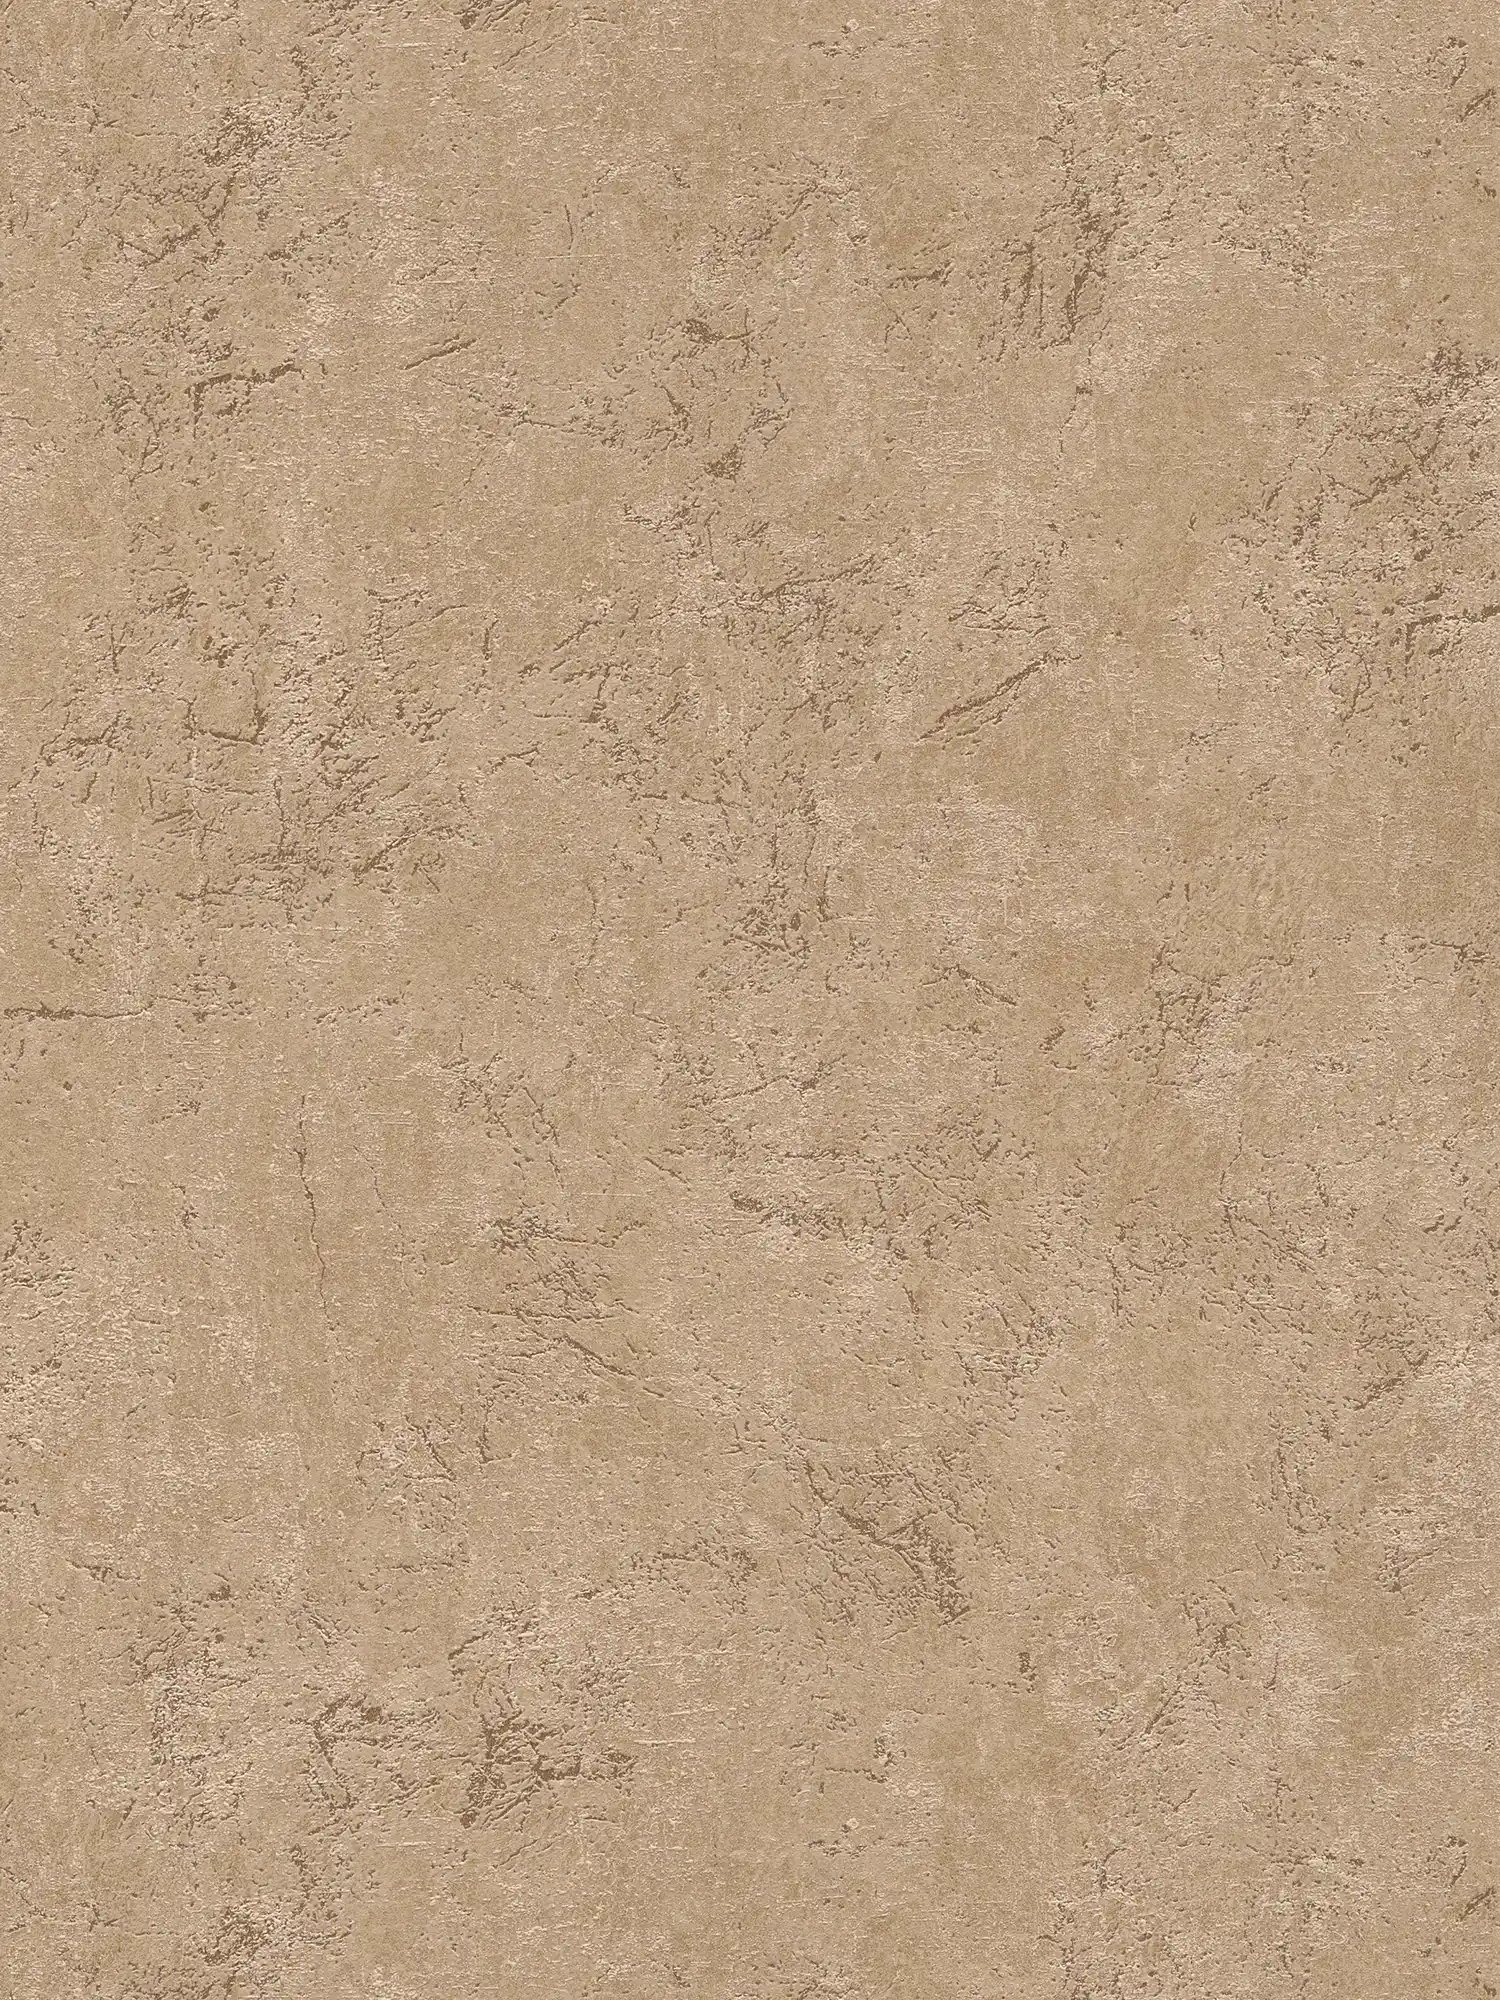 Wallpaper natural stone look marbled in warm brown
